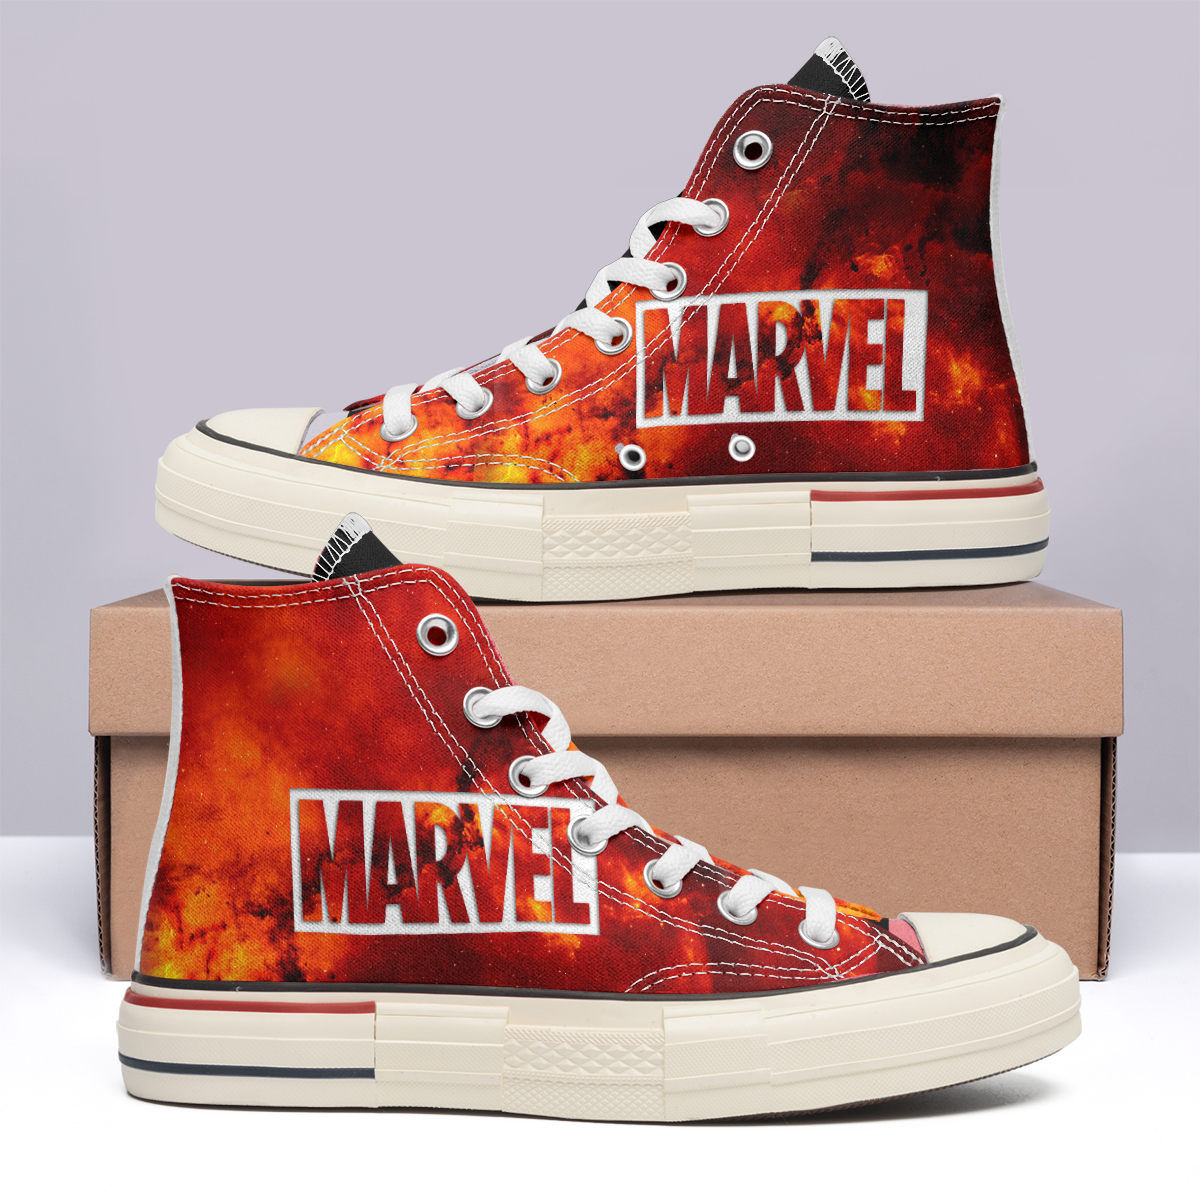 Captian America High Top Canvas Shoes Special Edition